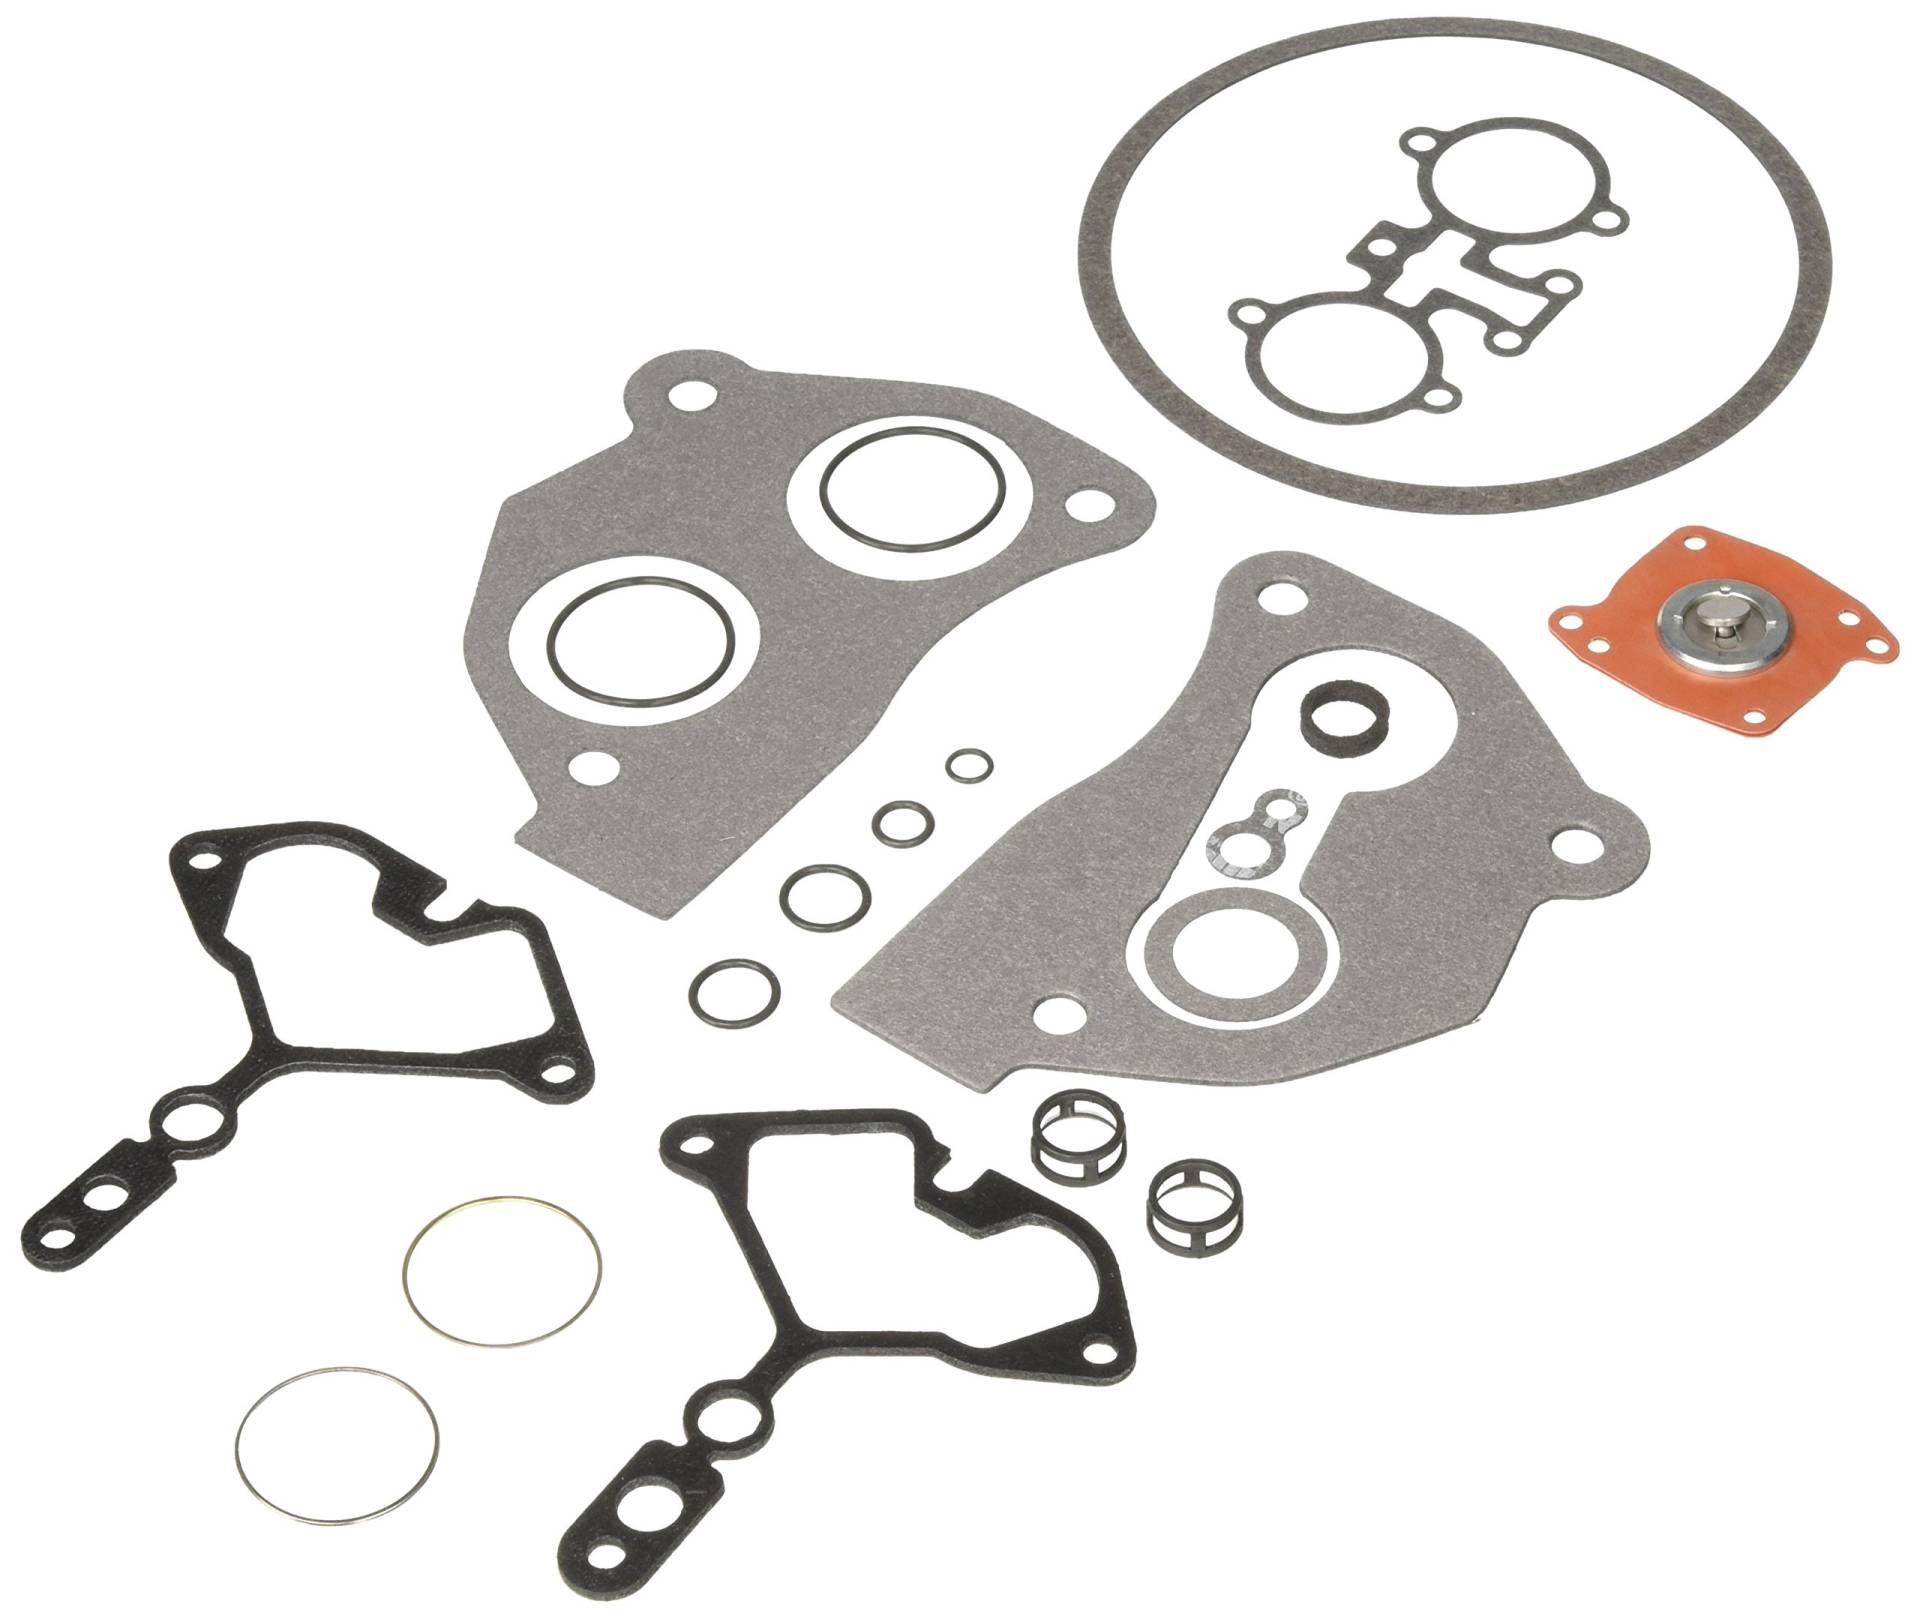 Standard Motor Products 1702 TBI-Kit von Standard Motor Products